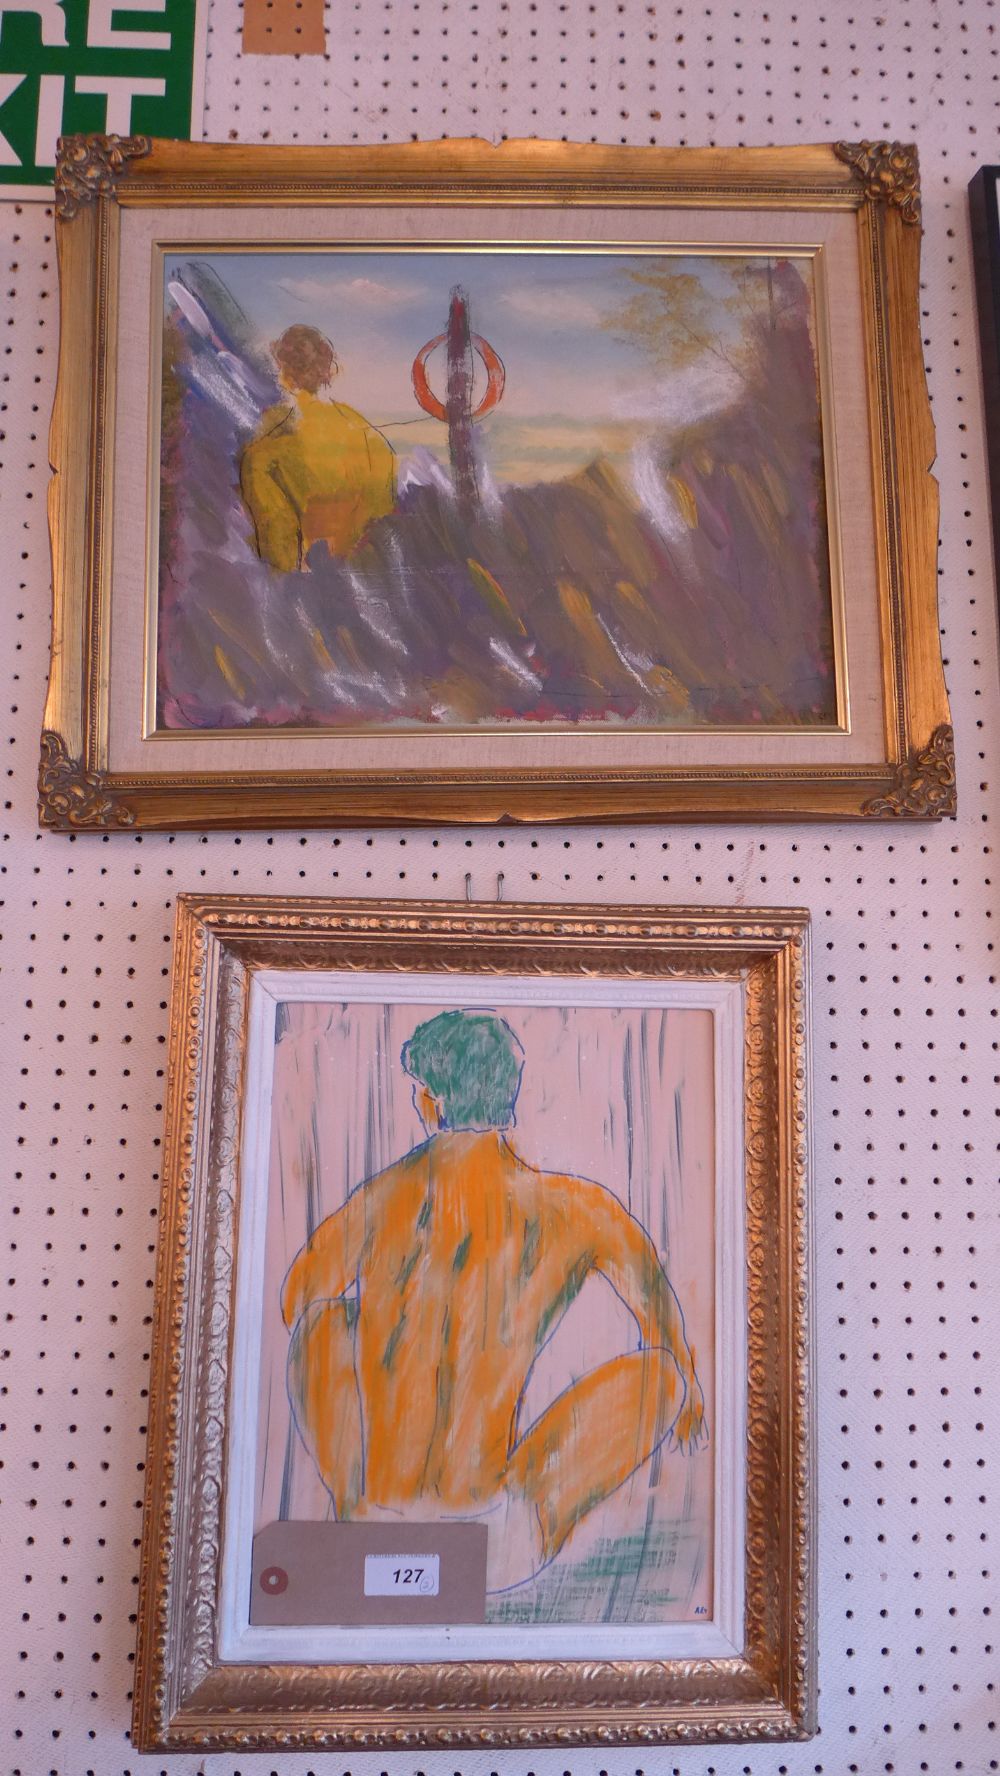 An oil on PVC nude by O.R. Rey together with another similar by the same artist, both in gilt